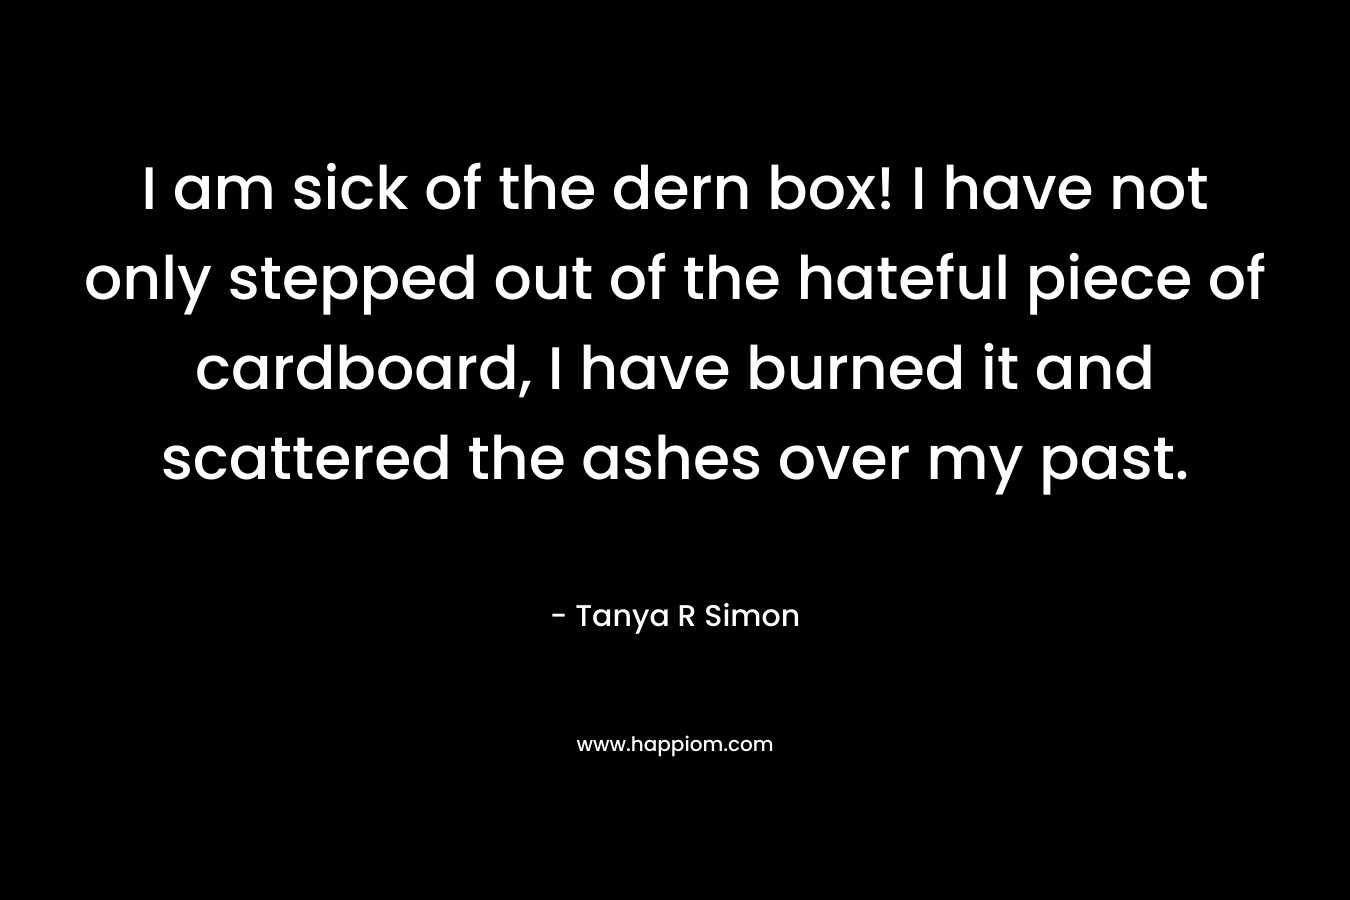 I am sick of the dern box! I have not only stepped out of the hateful piece of cardboard, I have burned it and scattered the ashes over my past.